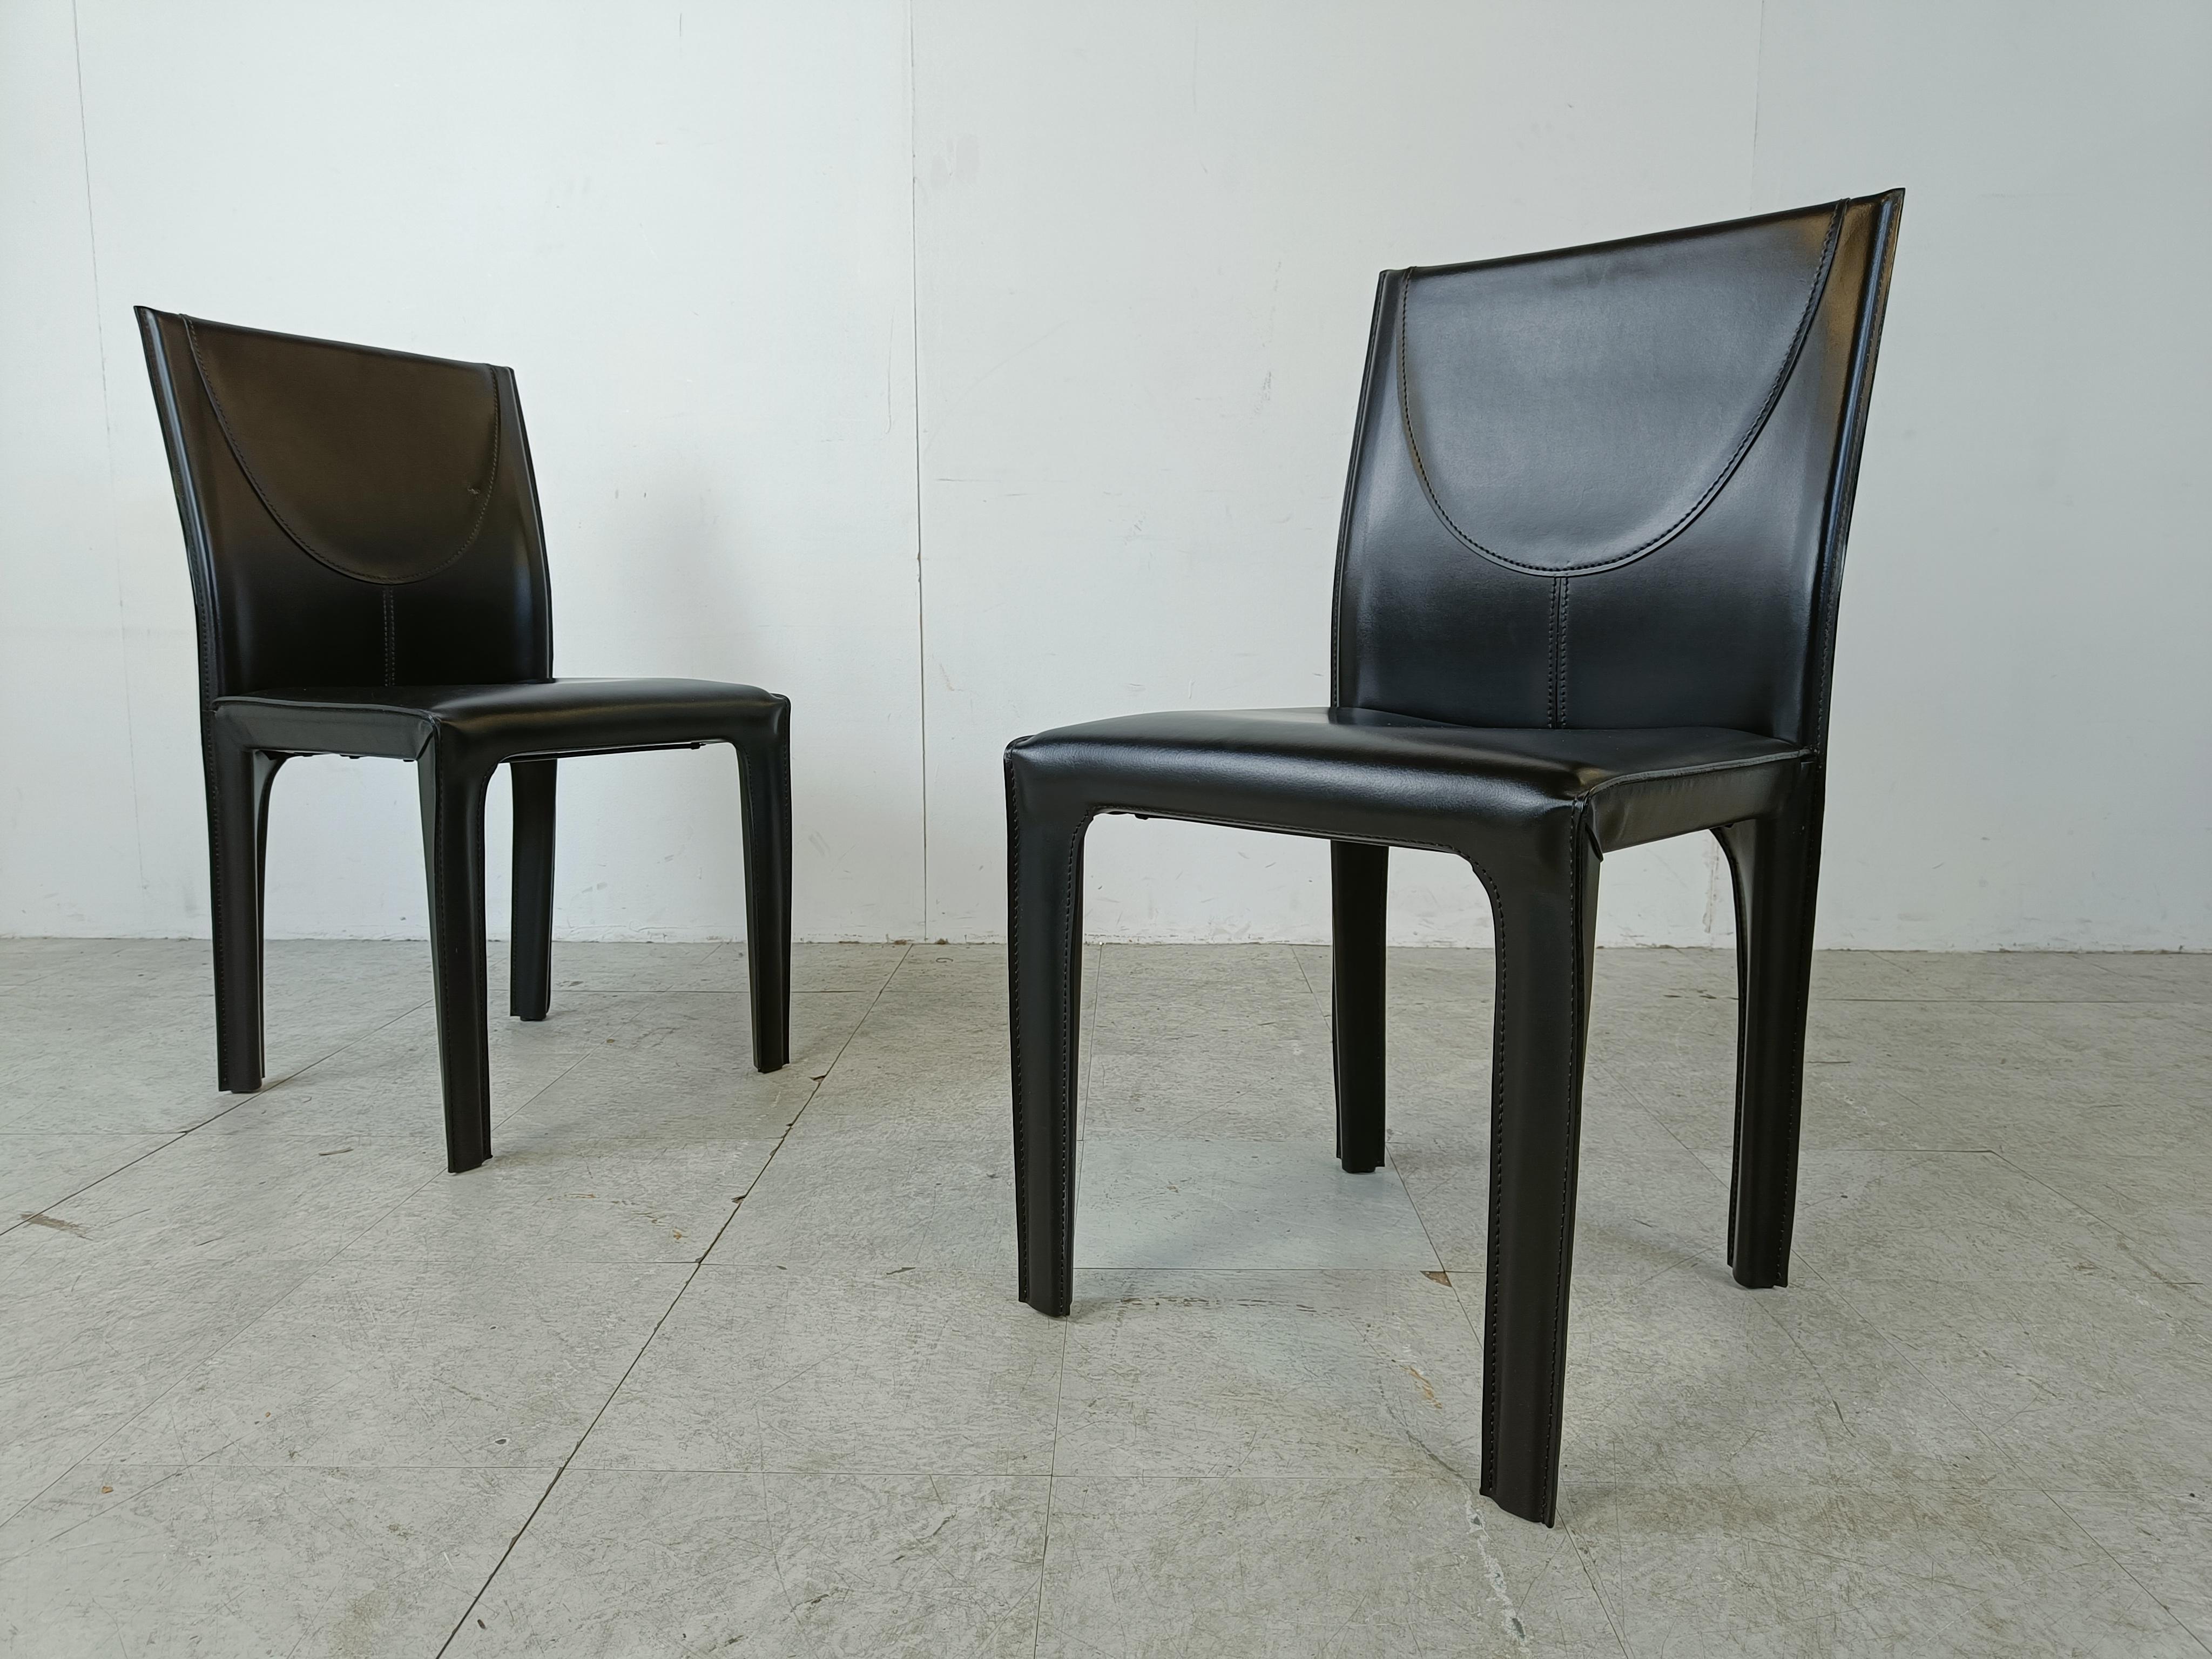 Leather Black leather dining chairs by Arper italy, 1980s - set of 6